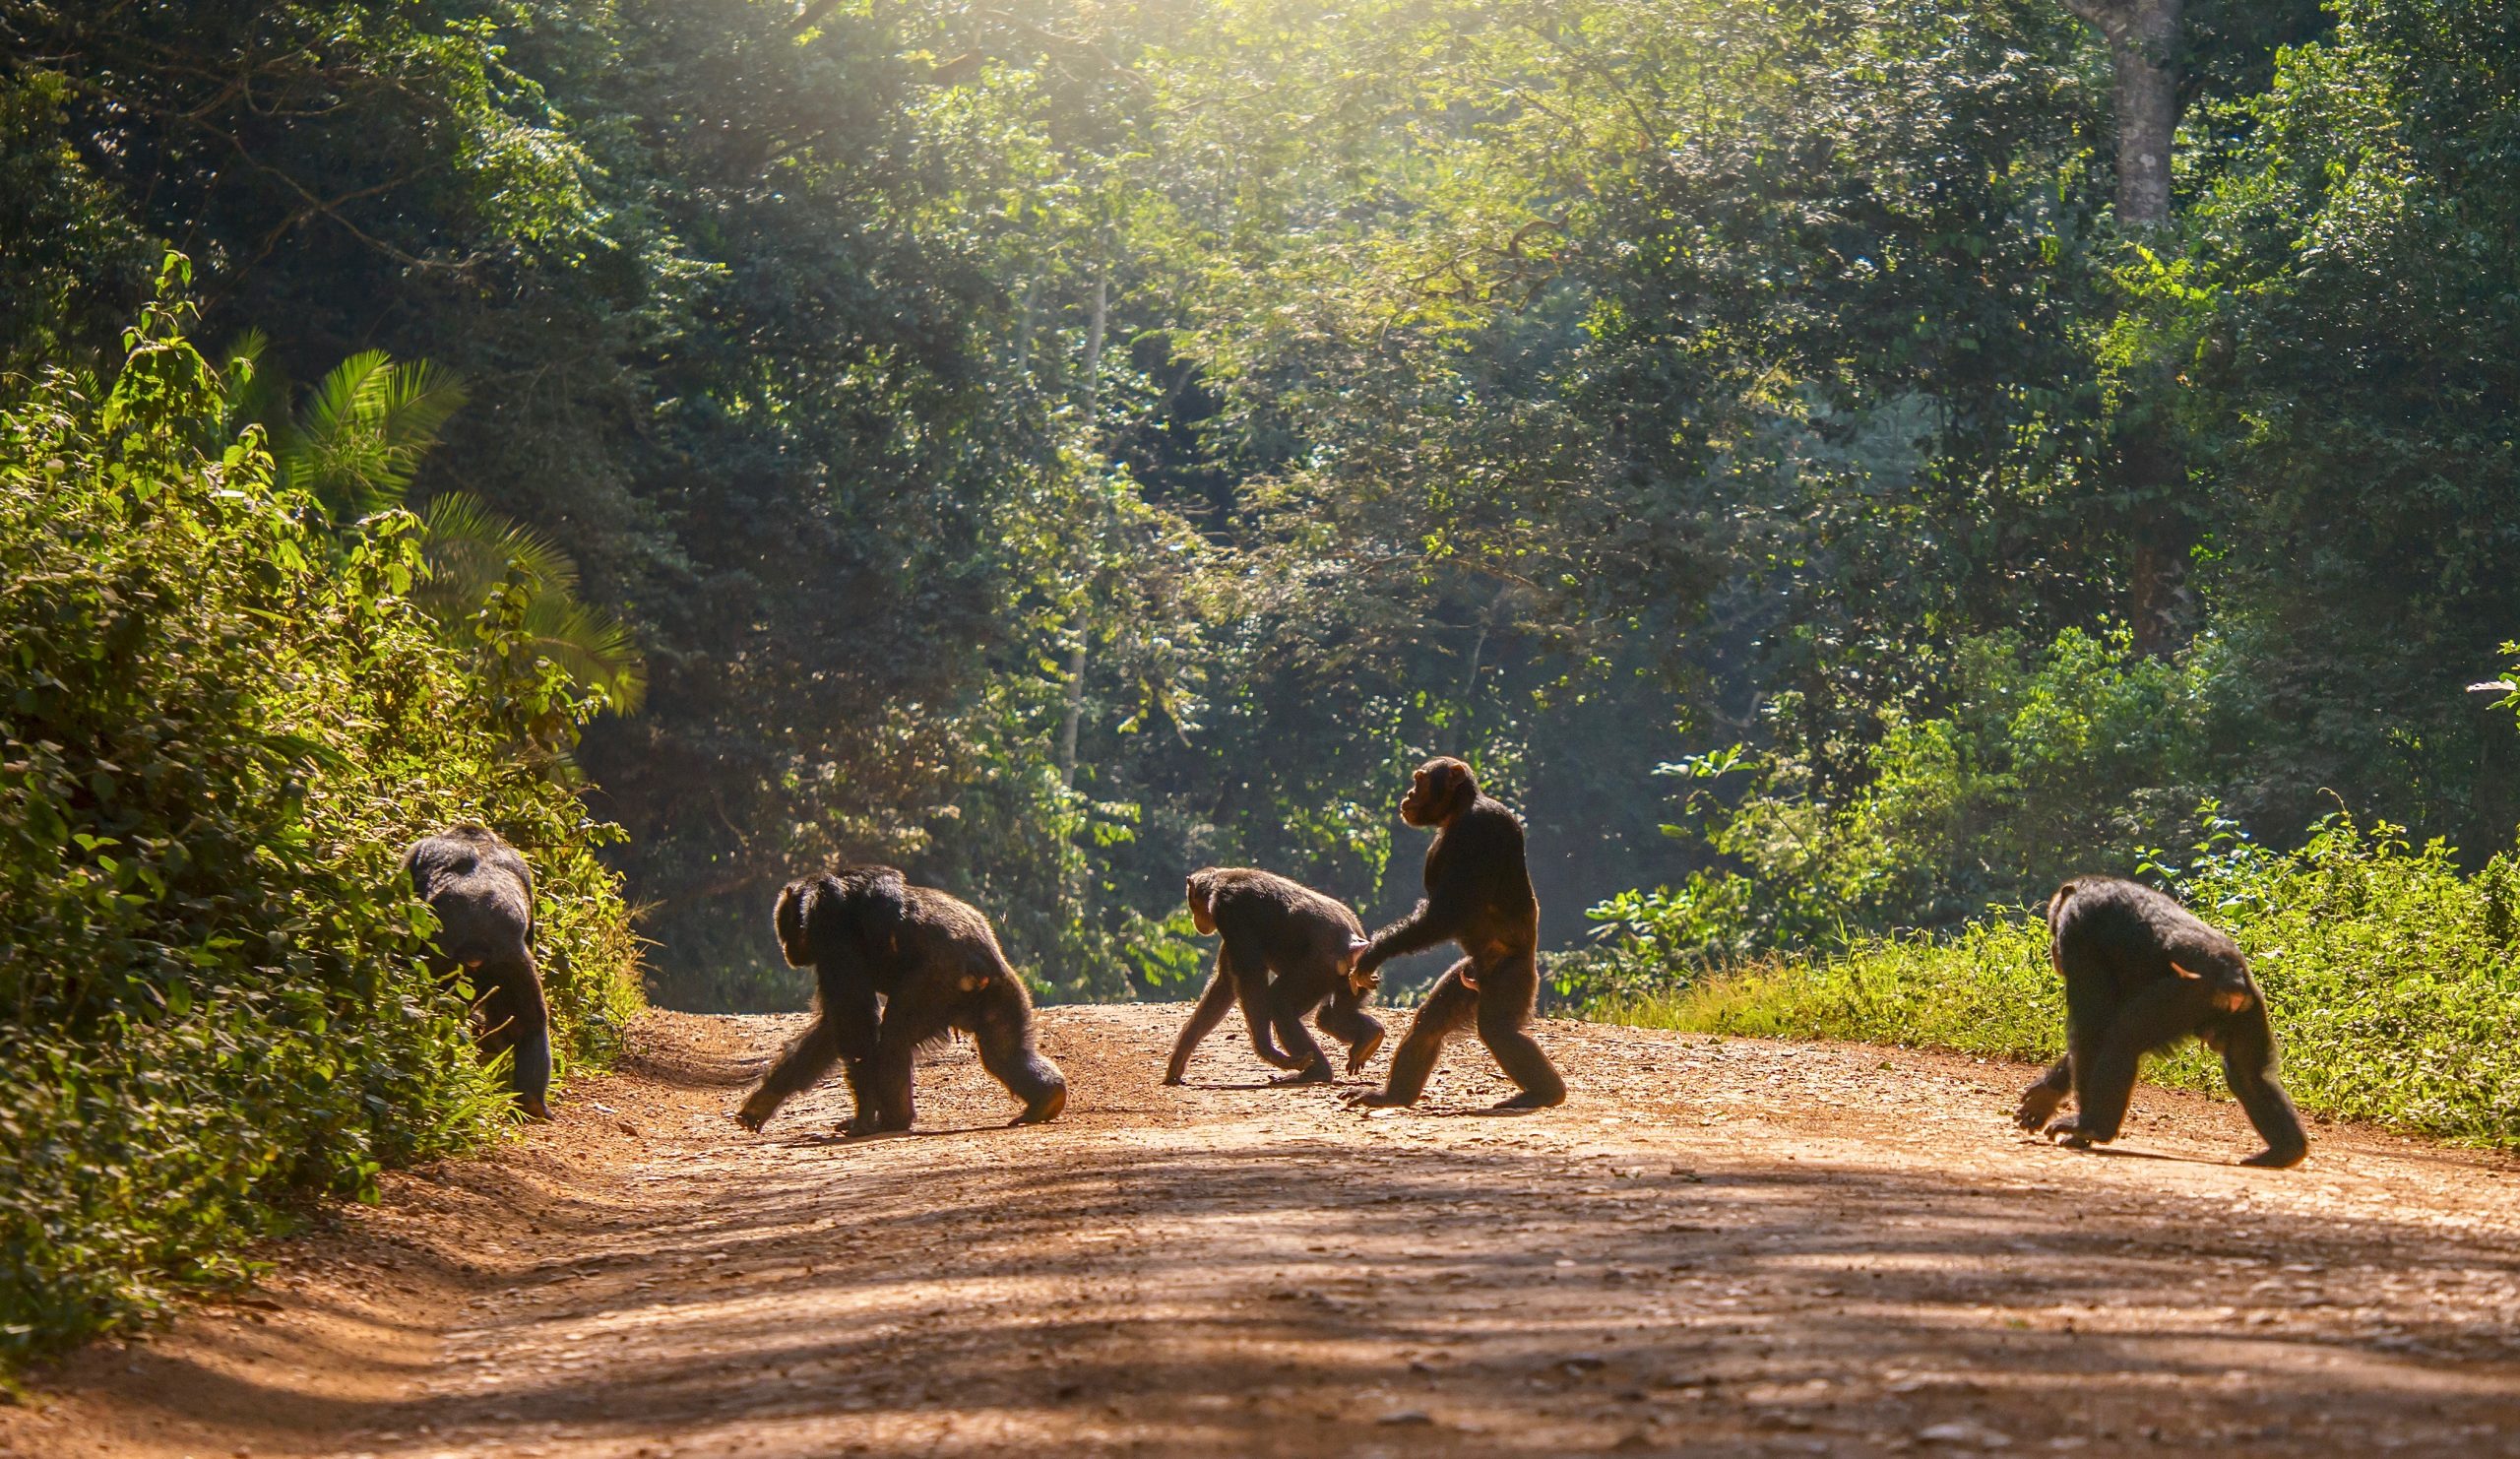 New species of great apes discovered in Germany